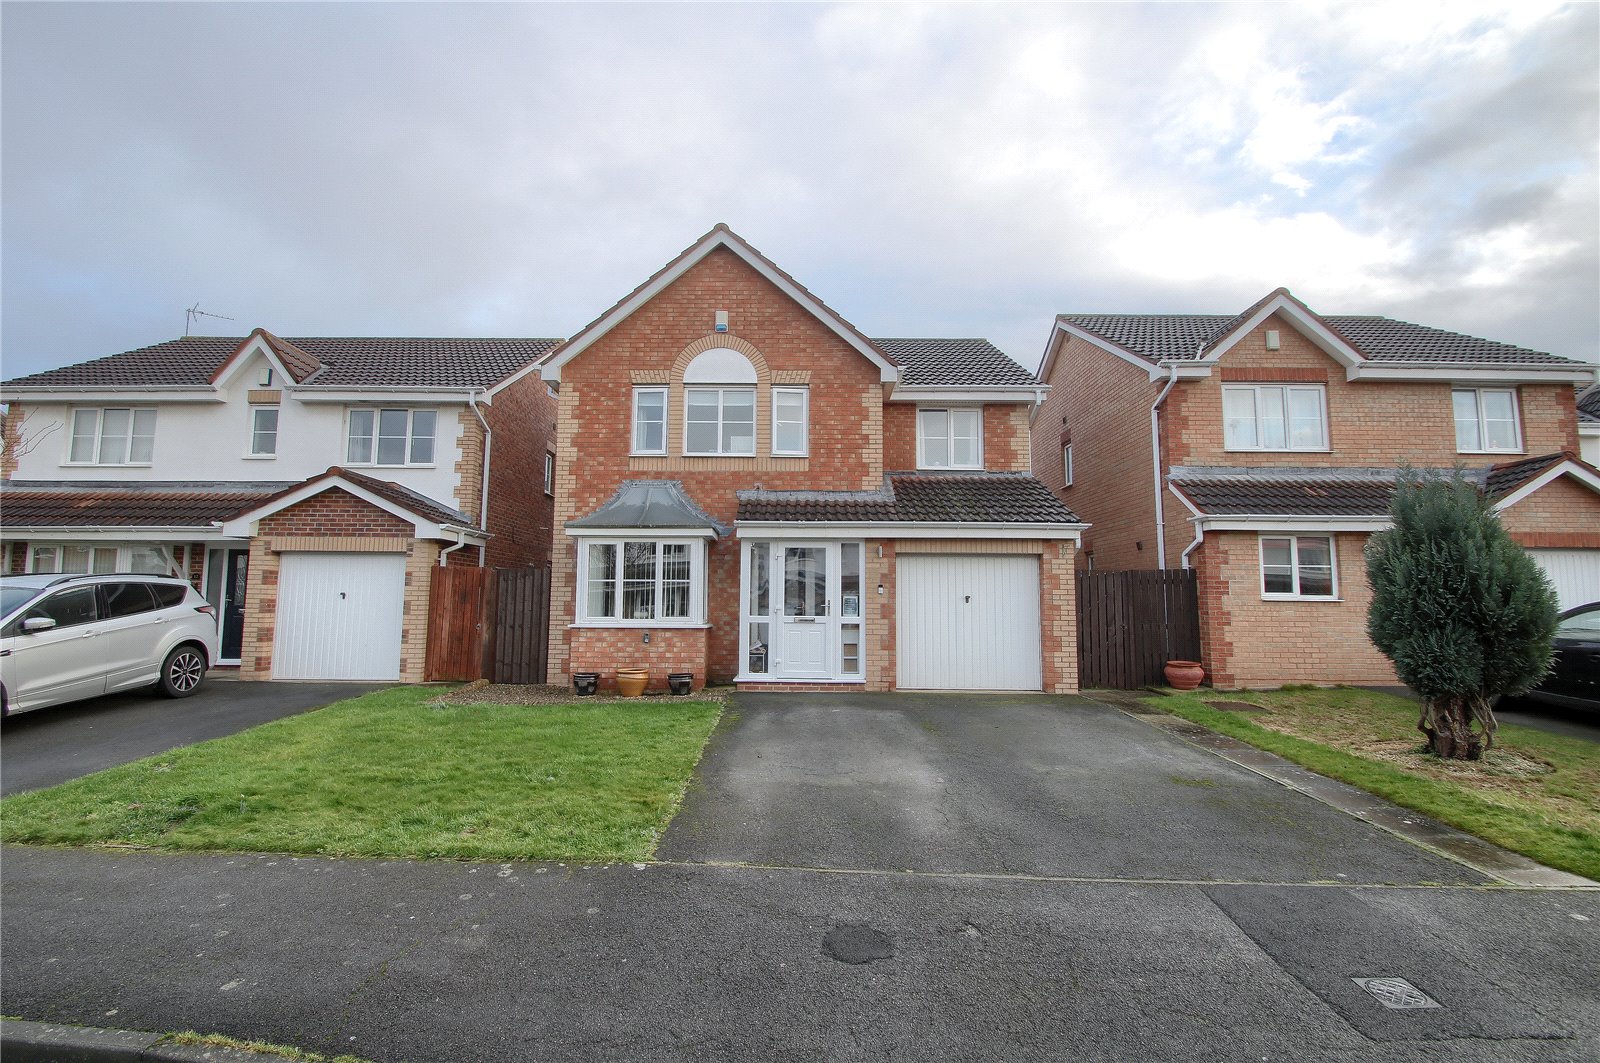 4 bed house for sale in Talbenny Grove, Ingleby Barwick  - Property Image 1